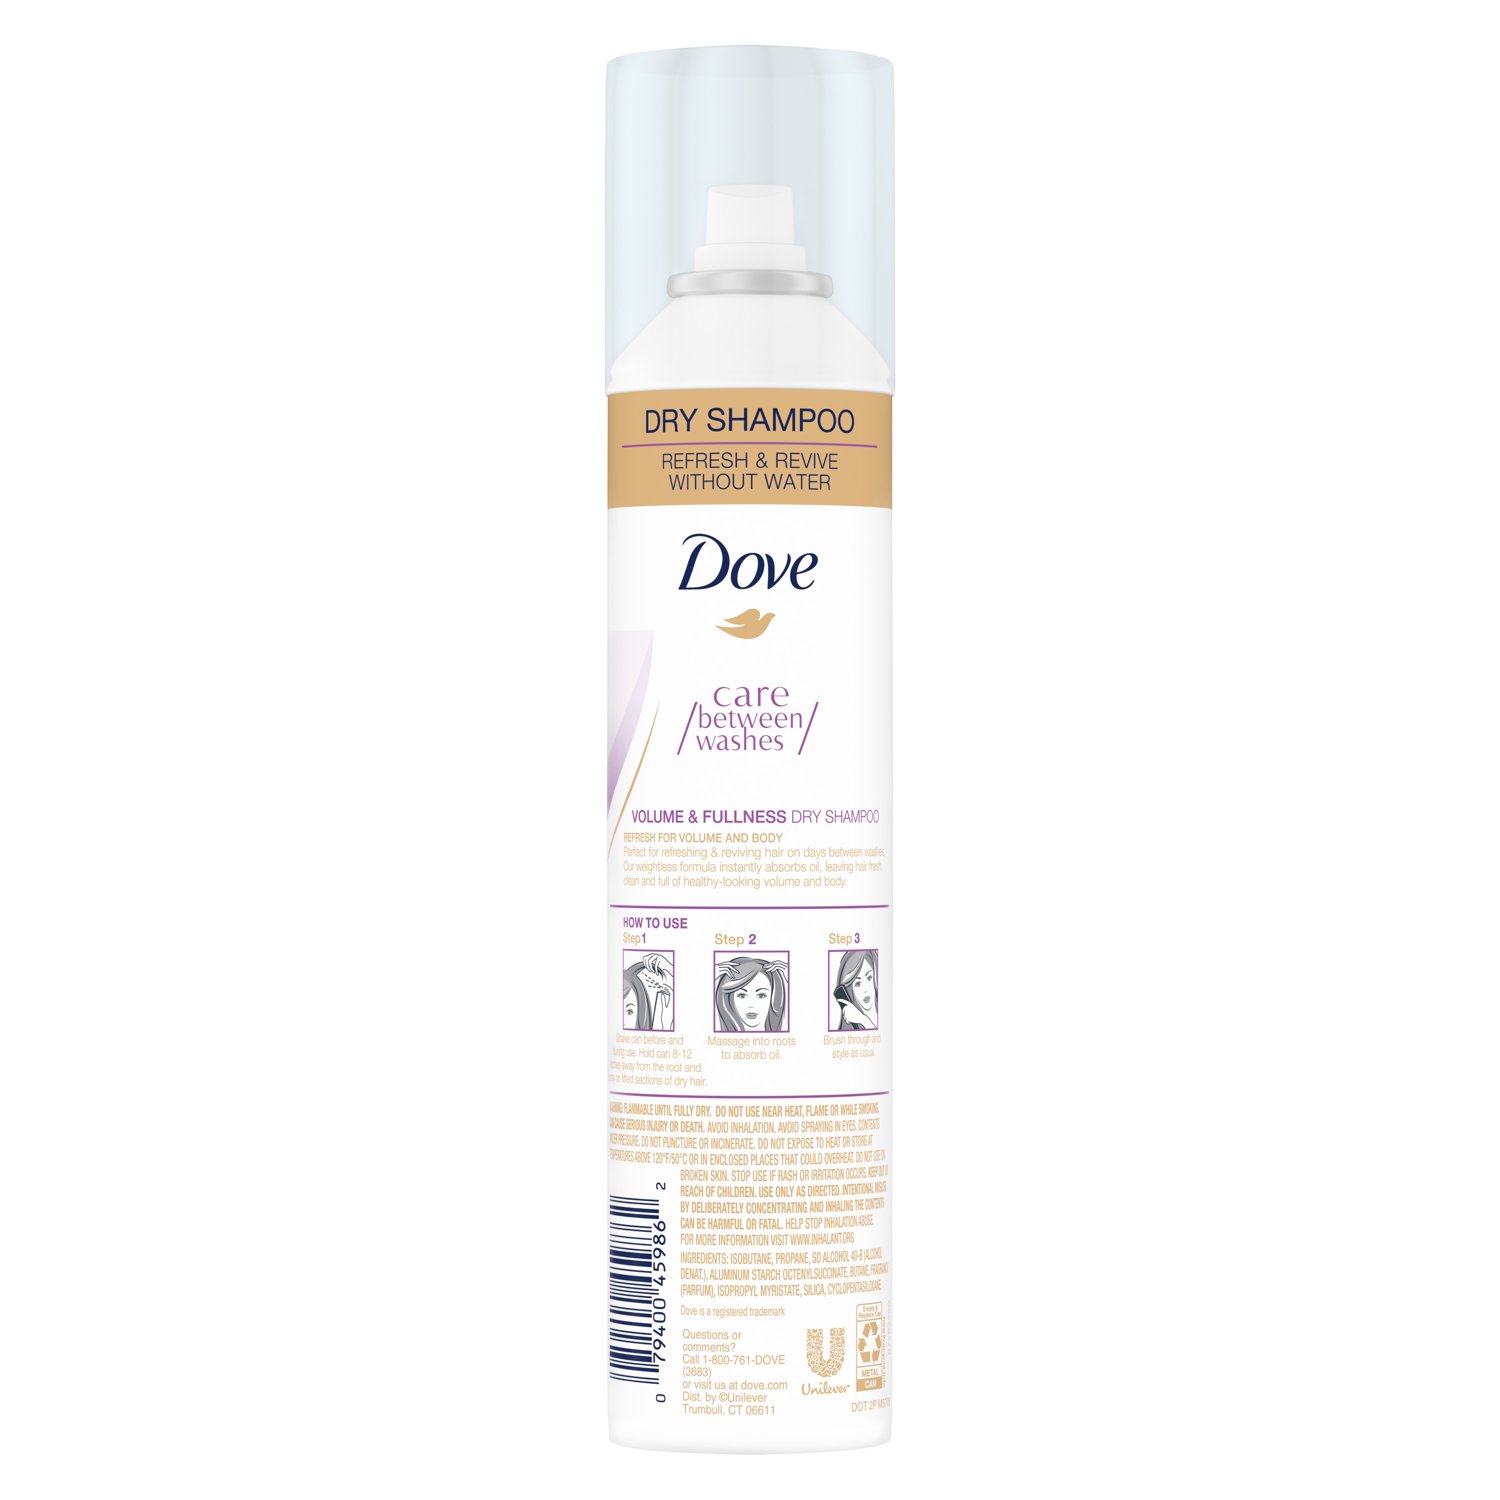 Dove Care Between Washes Volume and Fullness Dry Shampoo, 7.3 oz - image 5 of 10